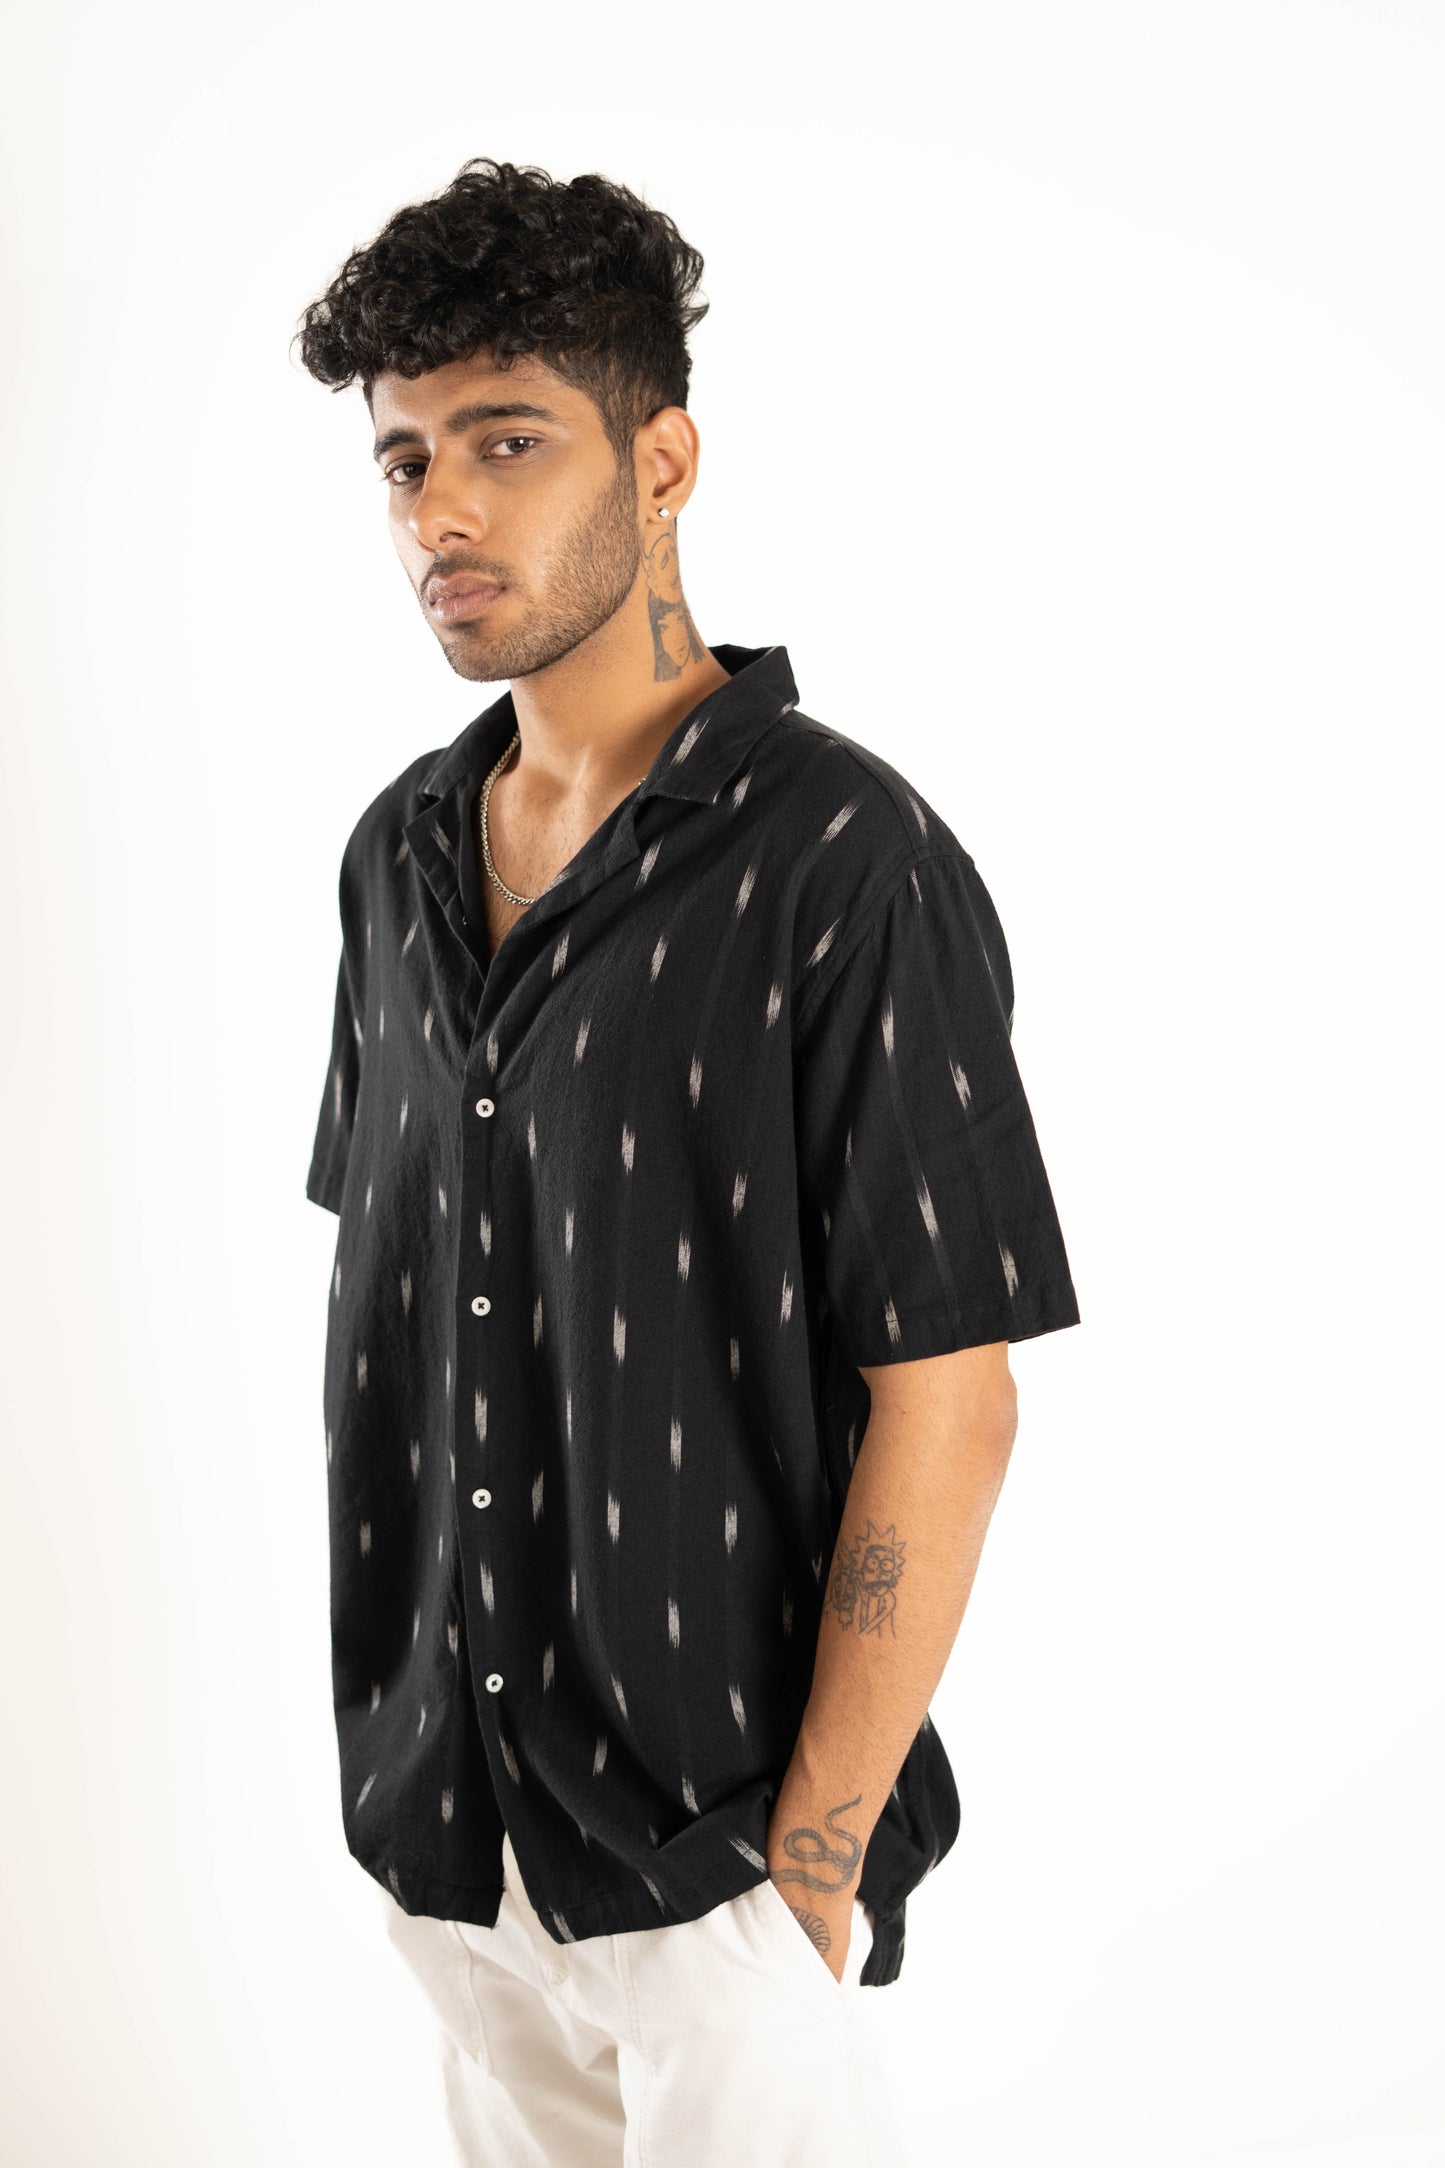 Men's Relaxed Fit Short Sleeves Black With White Strokes Shirt